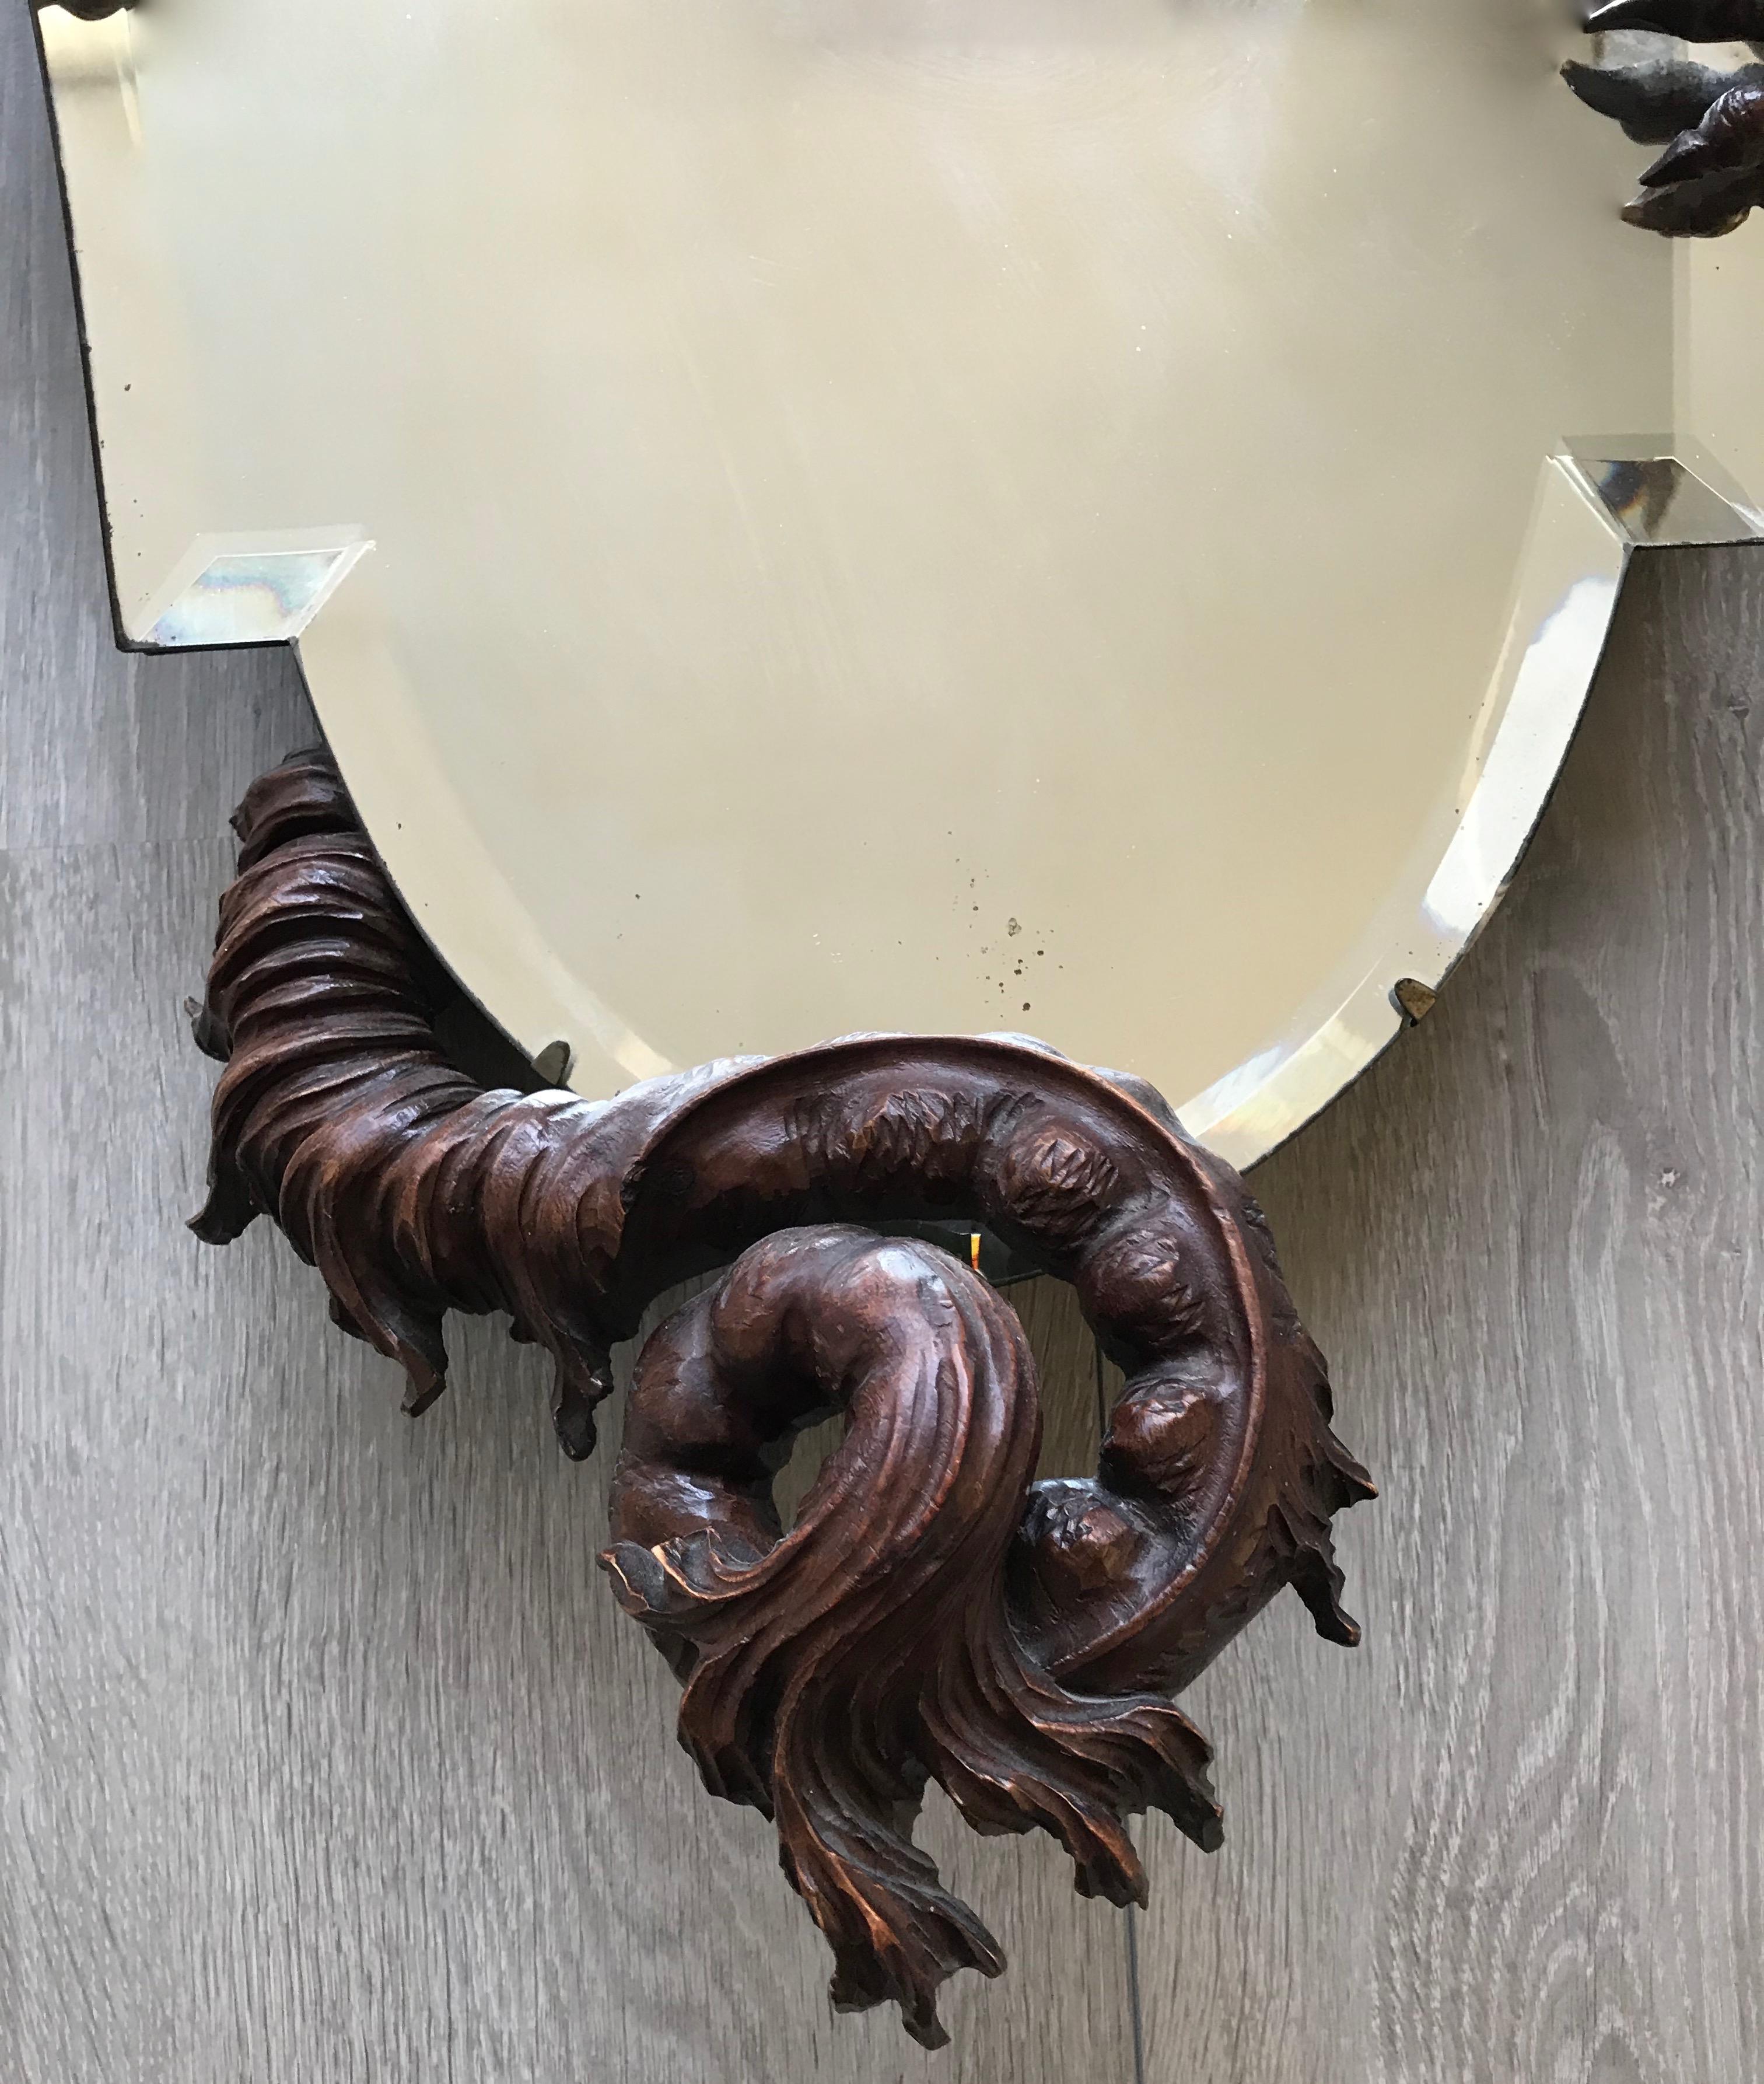 French Antique & Quality Carved Dragon Sculpture Holding a Shield Shaped Beveled Mirror